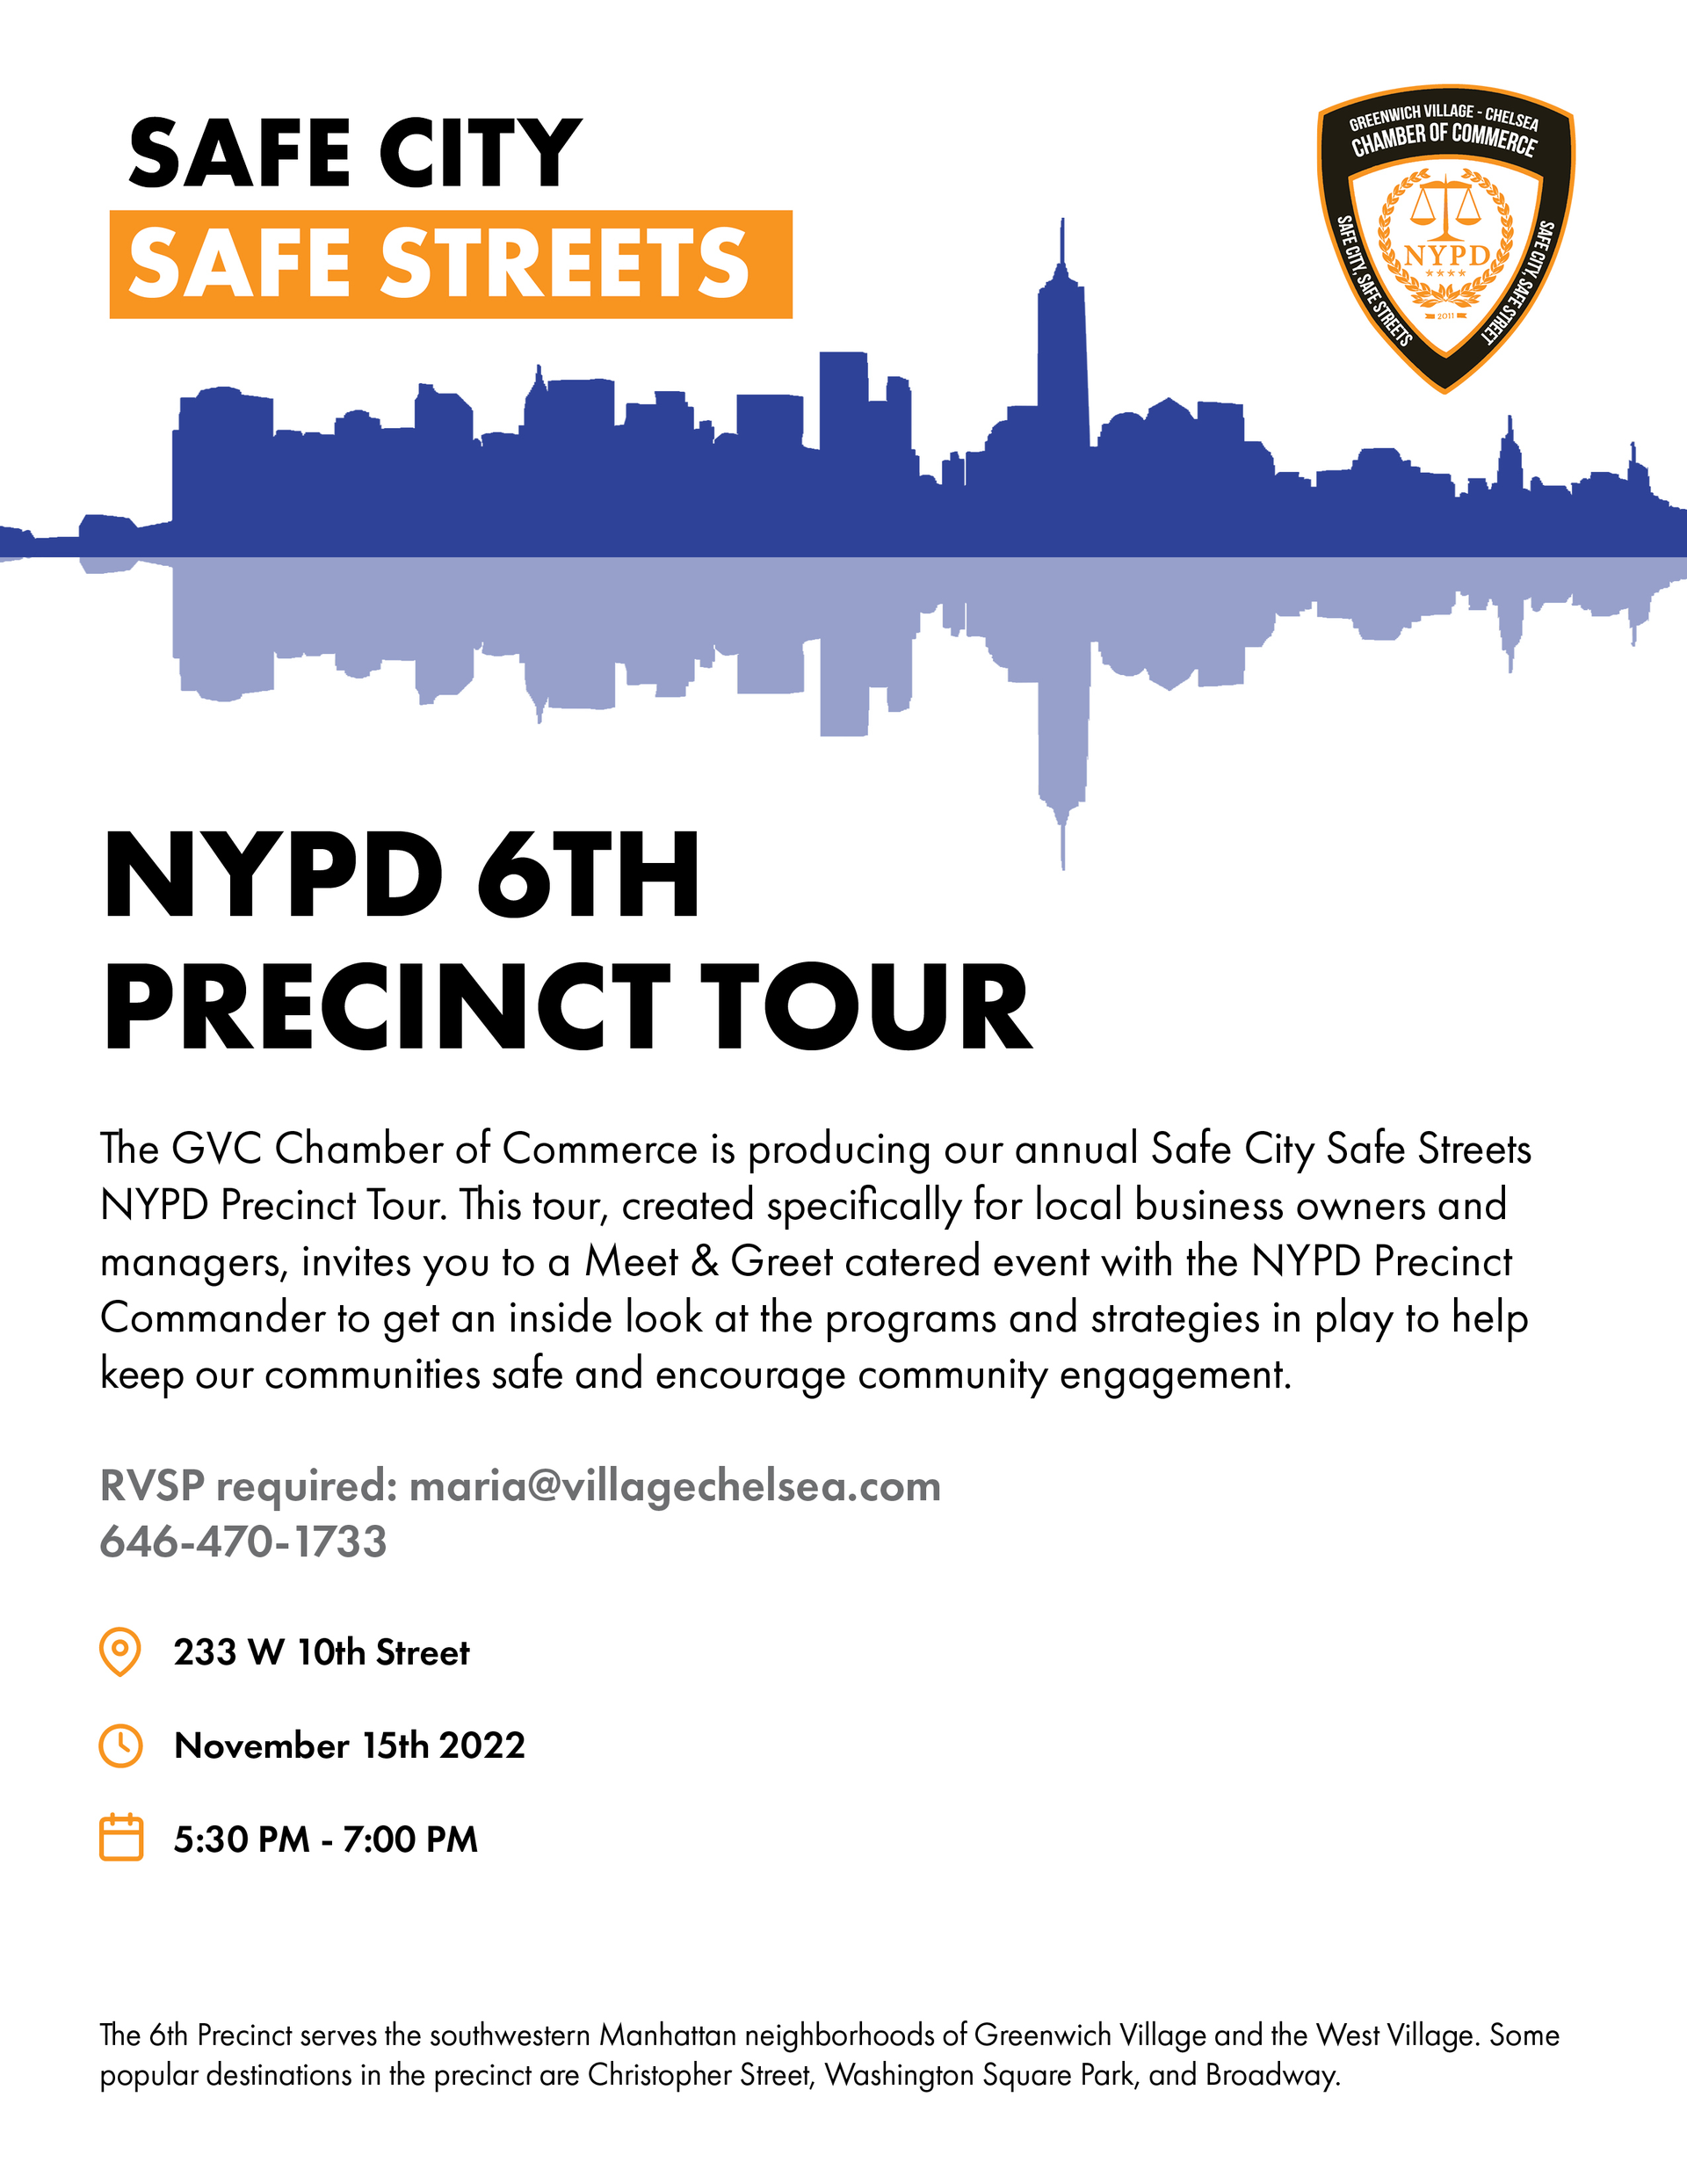 thumbnails GVCCC Safe City Safe Streets: Tour of the NYPD 6th Precinct